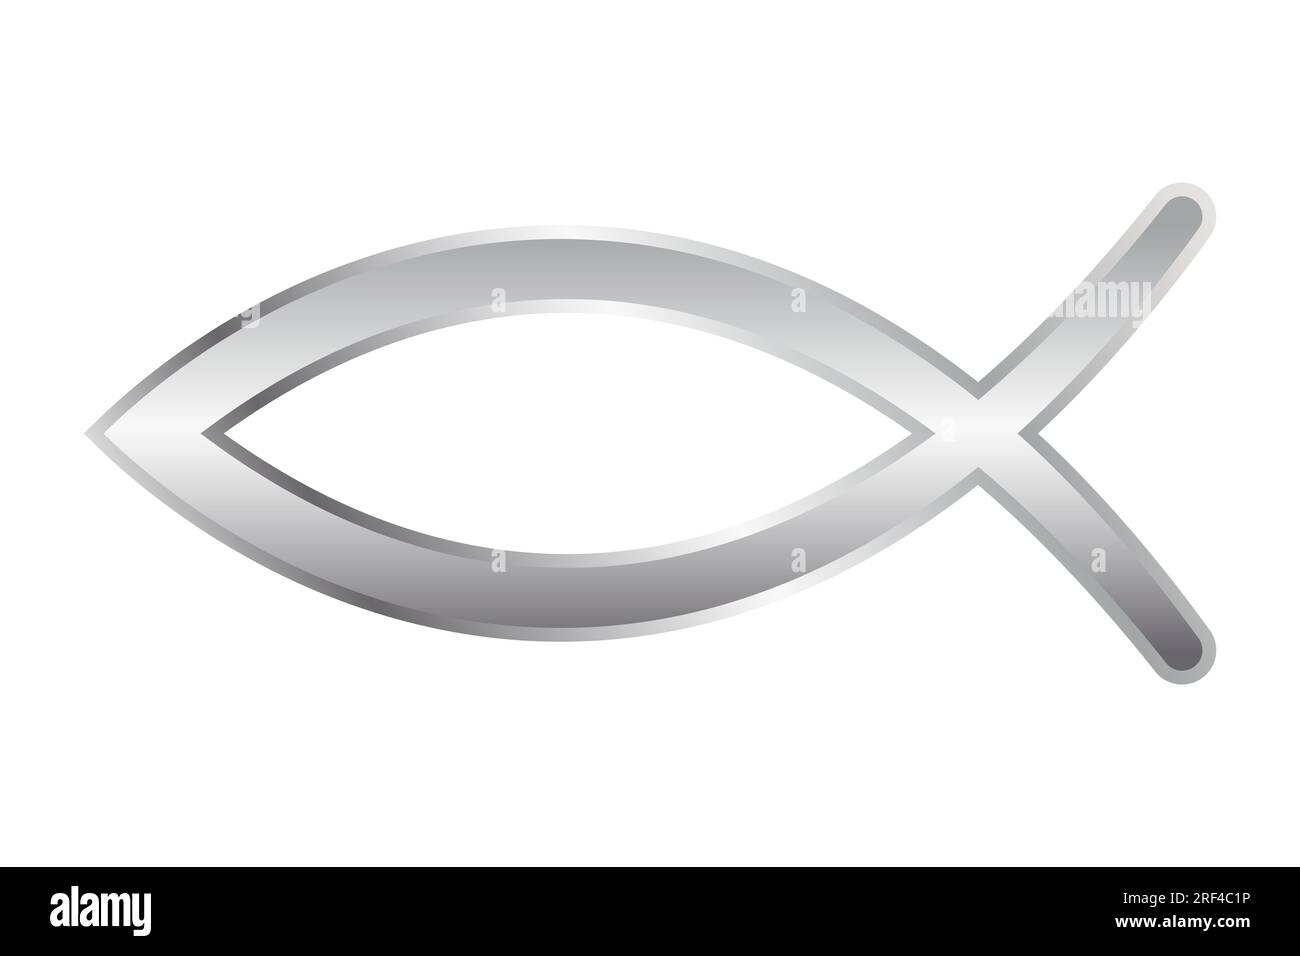 Silver colored sign of the fish symbol. Jesus fish, symbol of Christian art, consisting of 2 intersecting arcs, also called ichthys or ichthus. Stock Photo